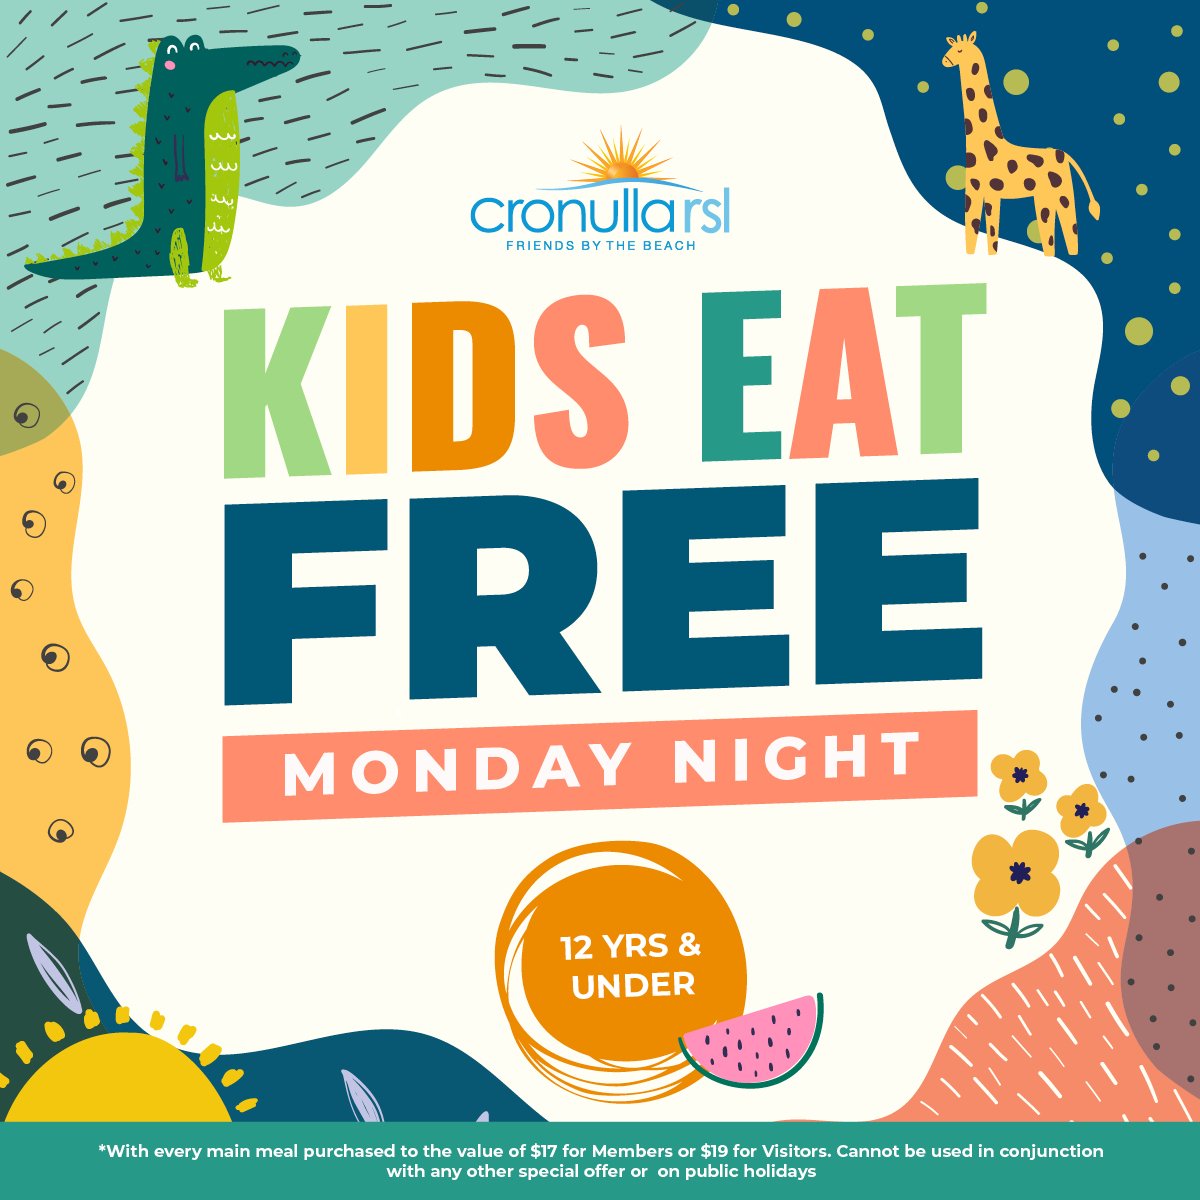 🎉 This one is for the parents! 🎉

Join us for an unforgettable family night every Monday at Cronulla RSL because Kids Eat FREE! That's right, children 12 years and under dine on us when you purchase any main meal priced at $17 for members or $19 fo